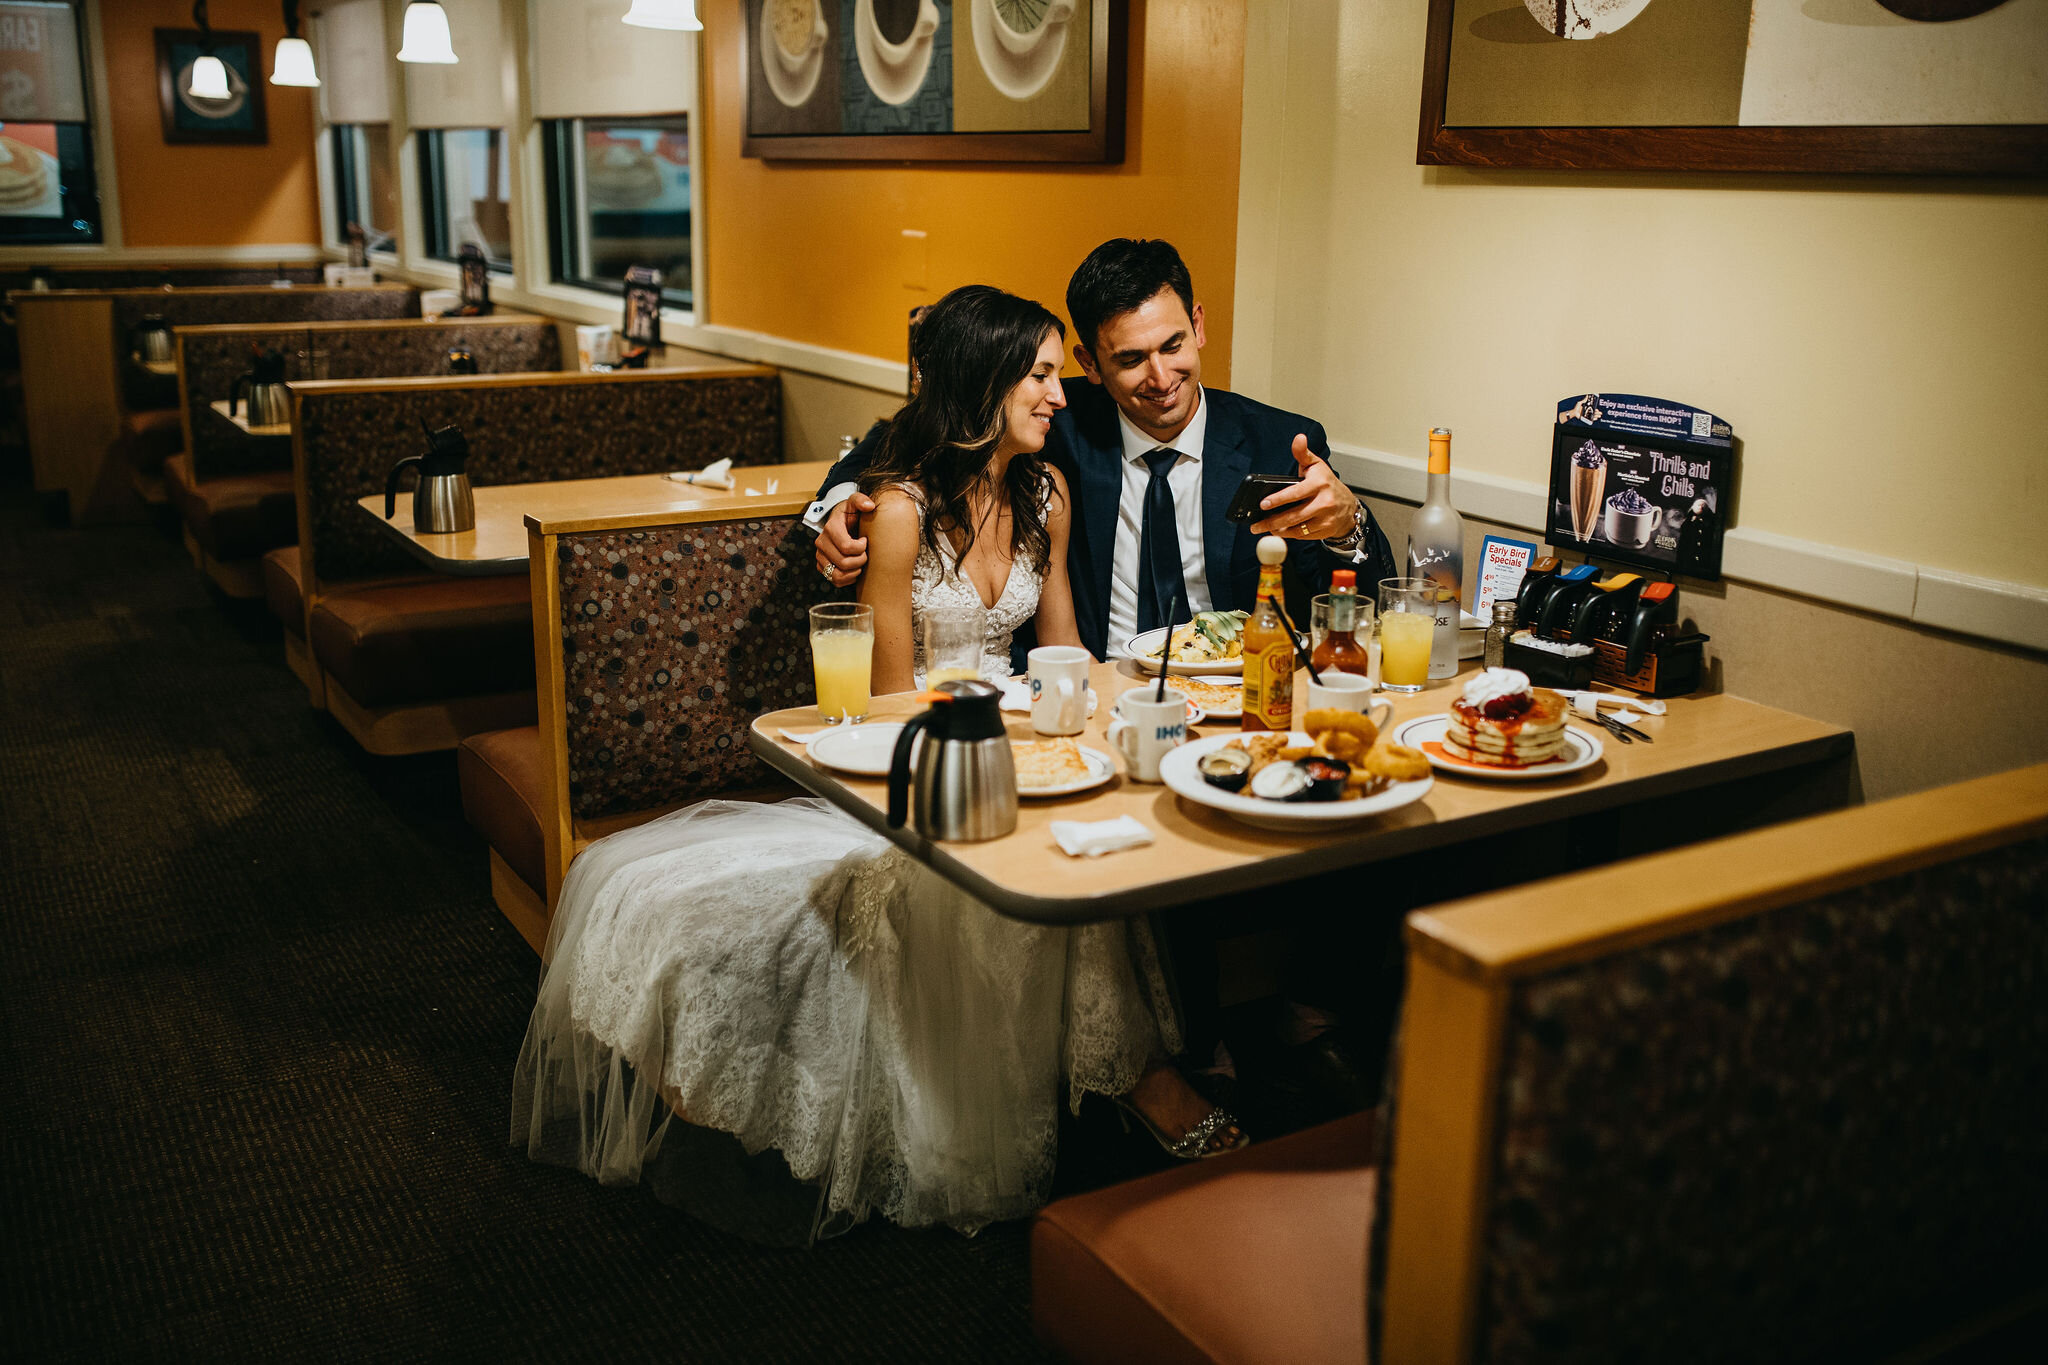 After the reception, why not go to iHop for late night pancakes?